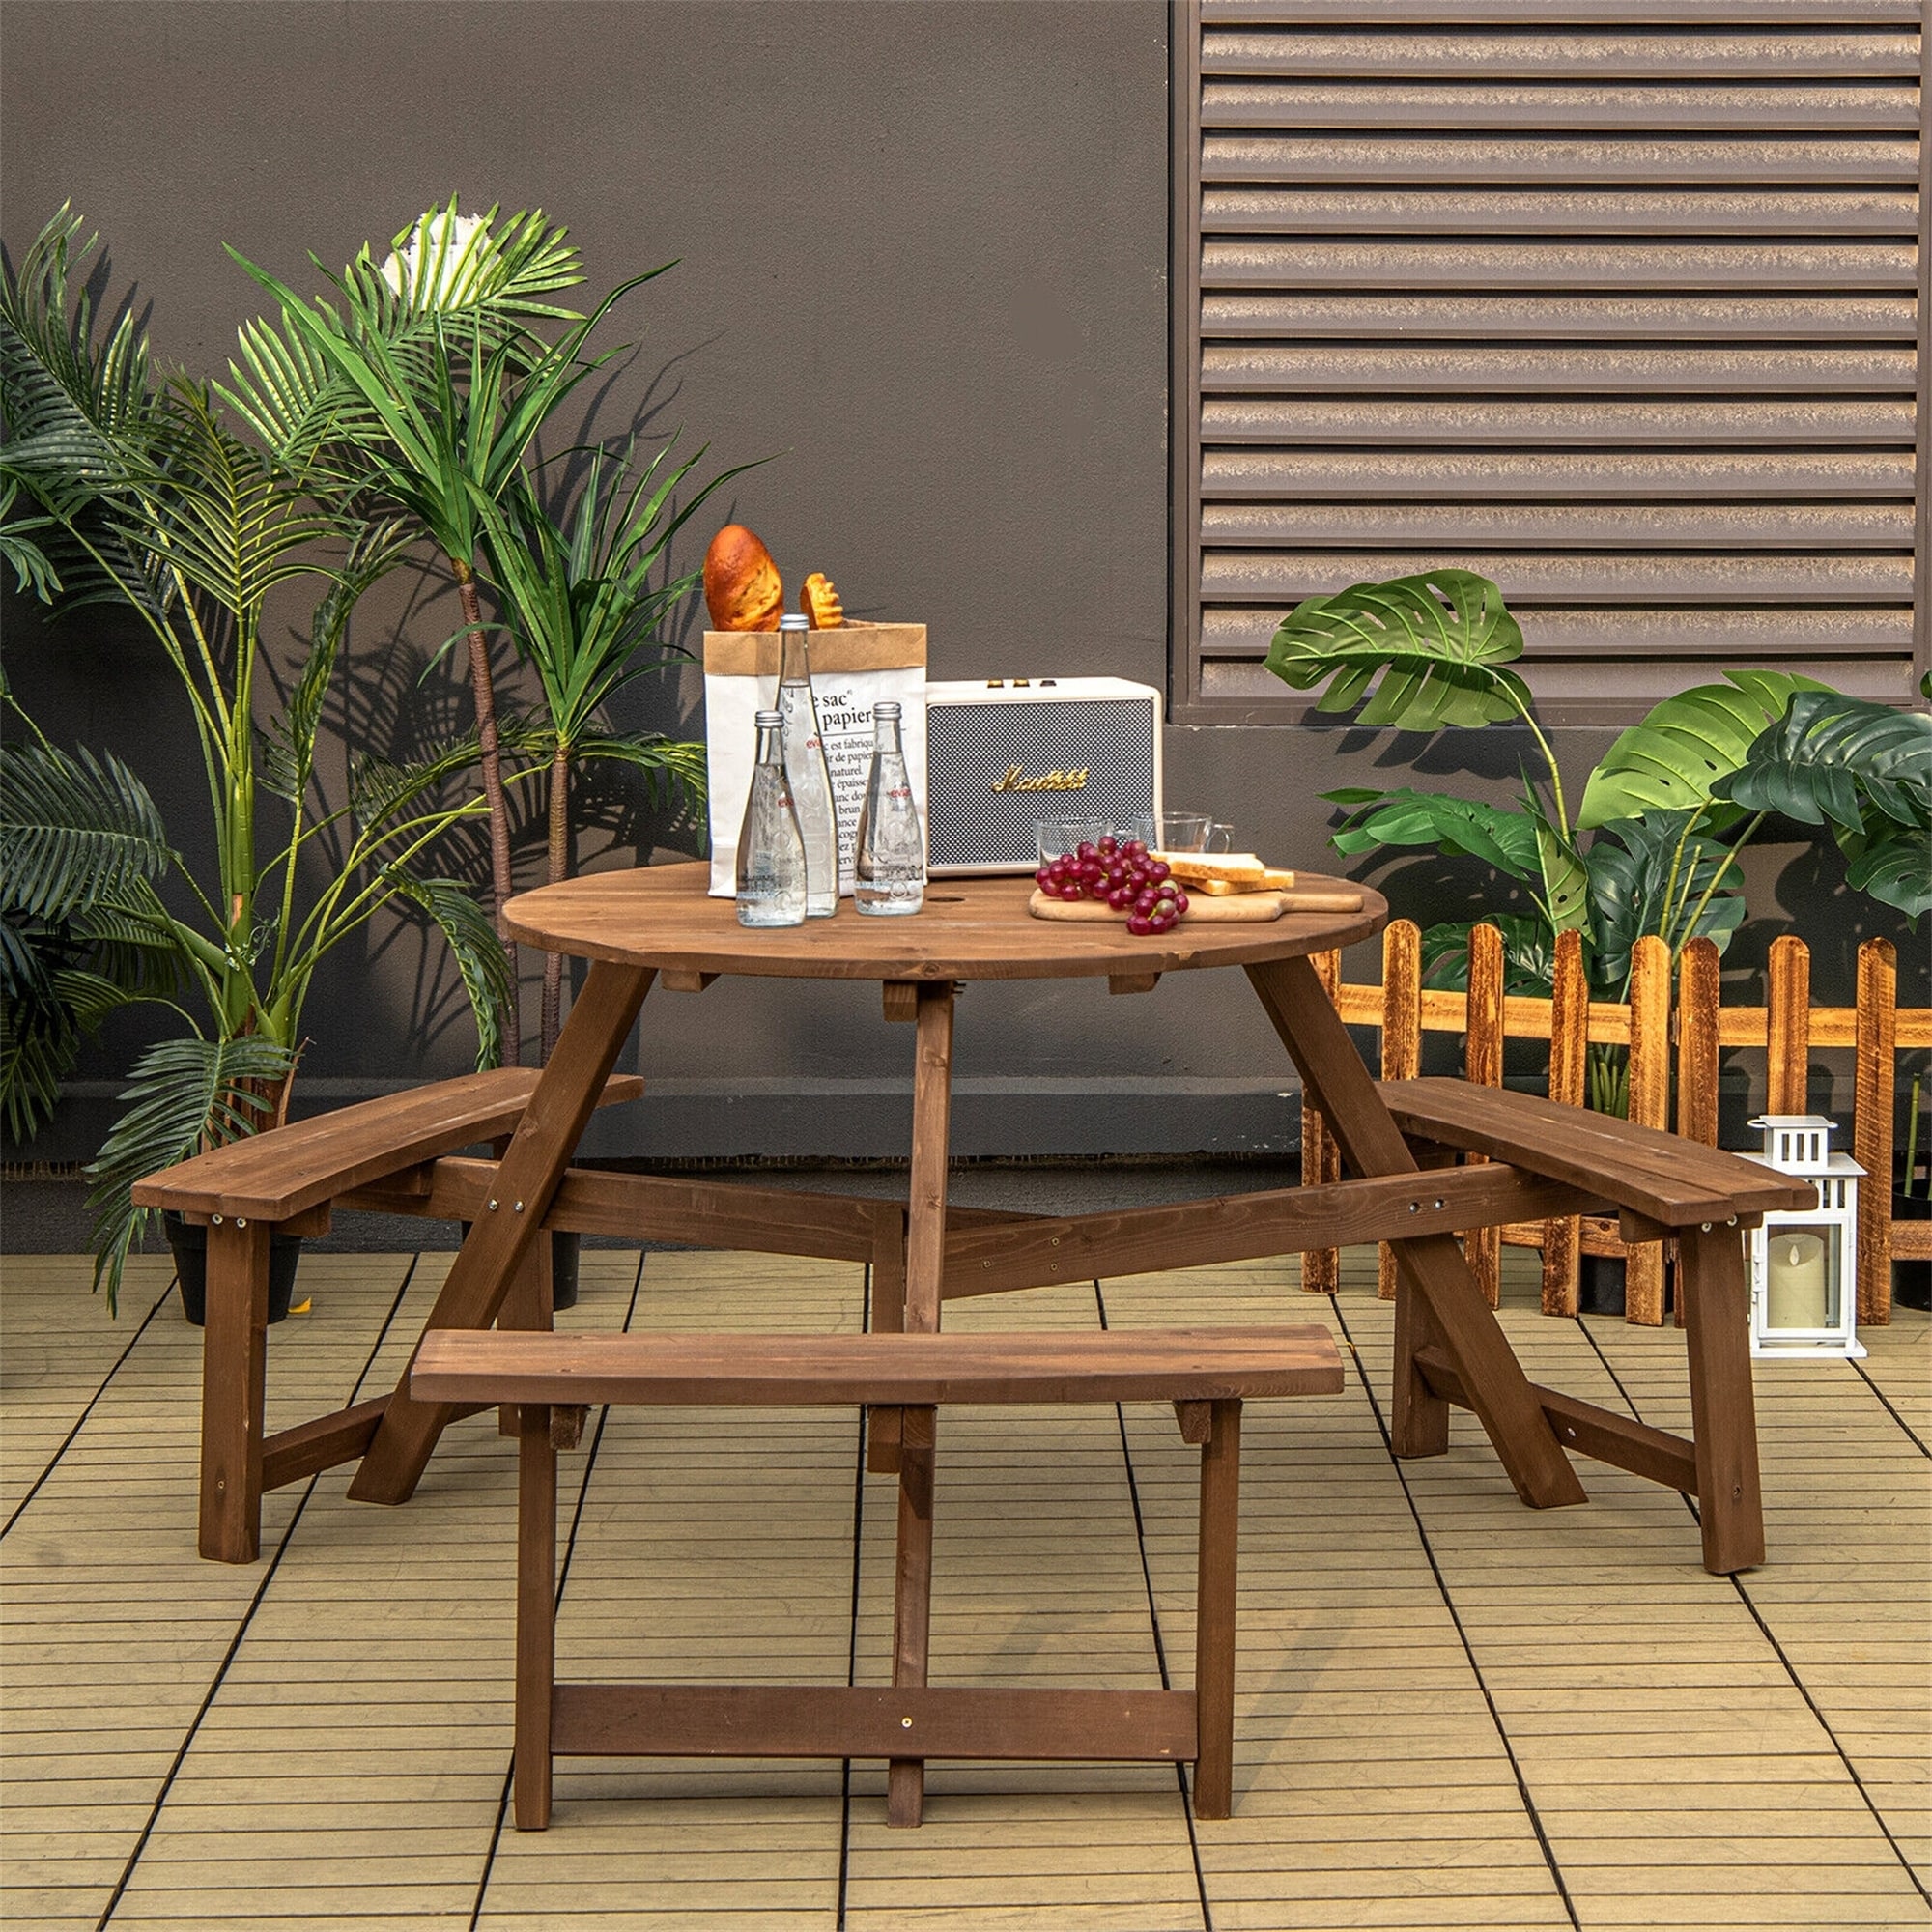 6-person Brown Round Wooden Picnic Table With Umbrella Hole And 3 Built-in Benches